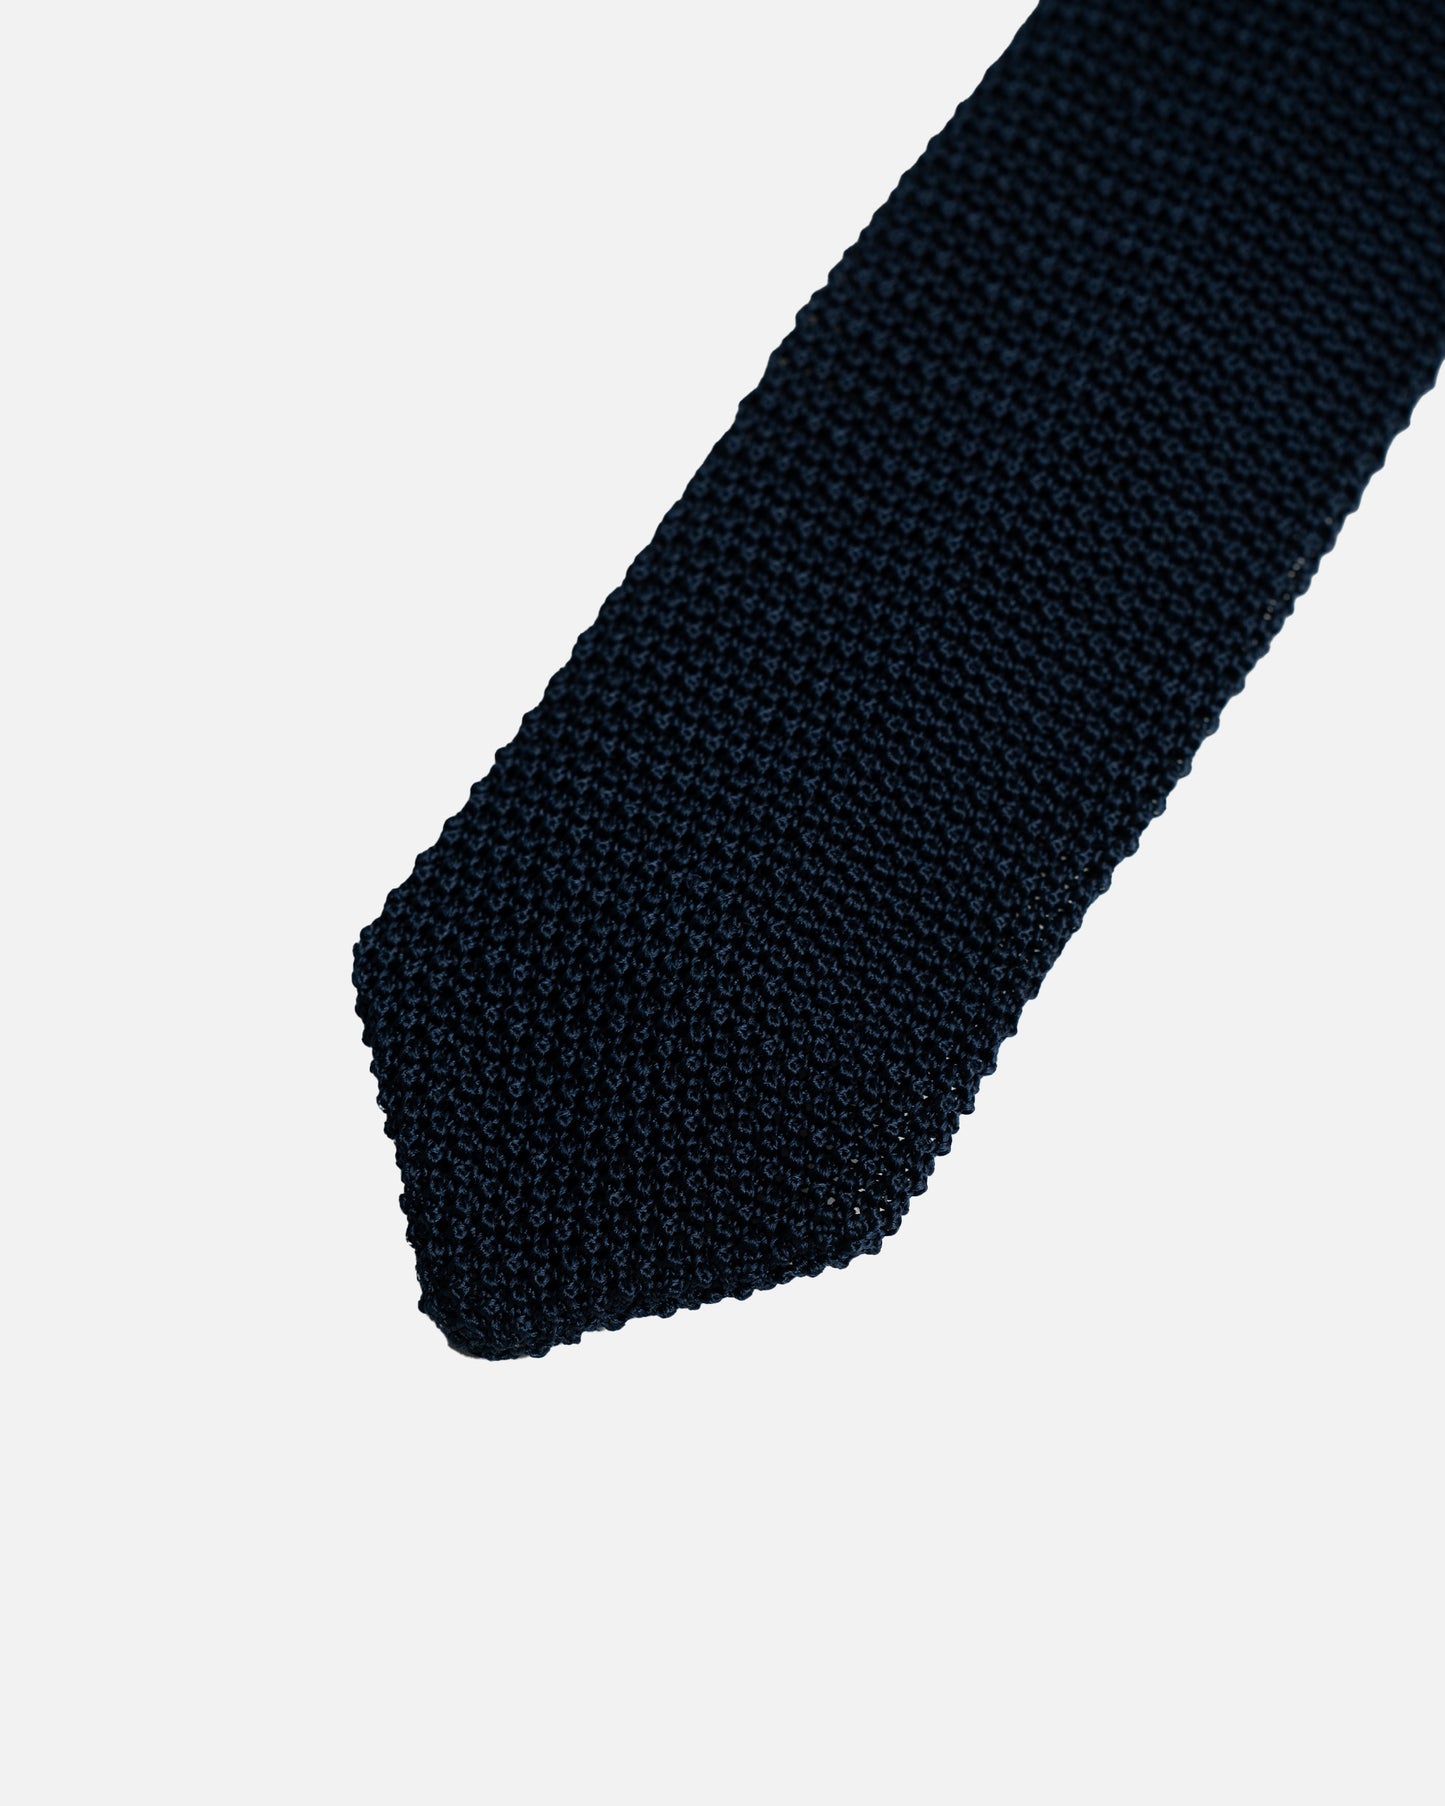 The Decorum Knit Tie in Royal Blue